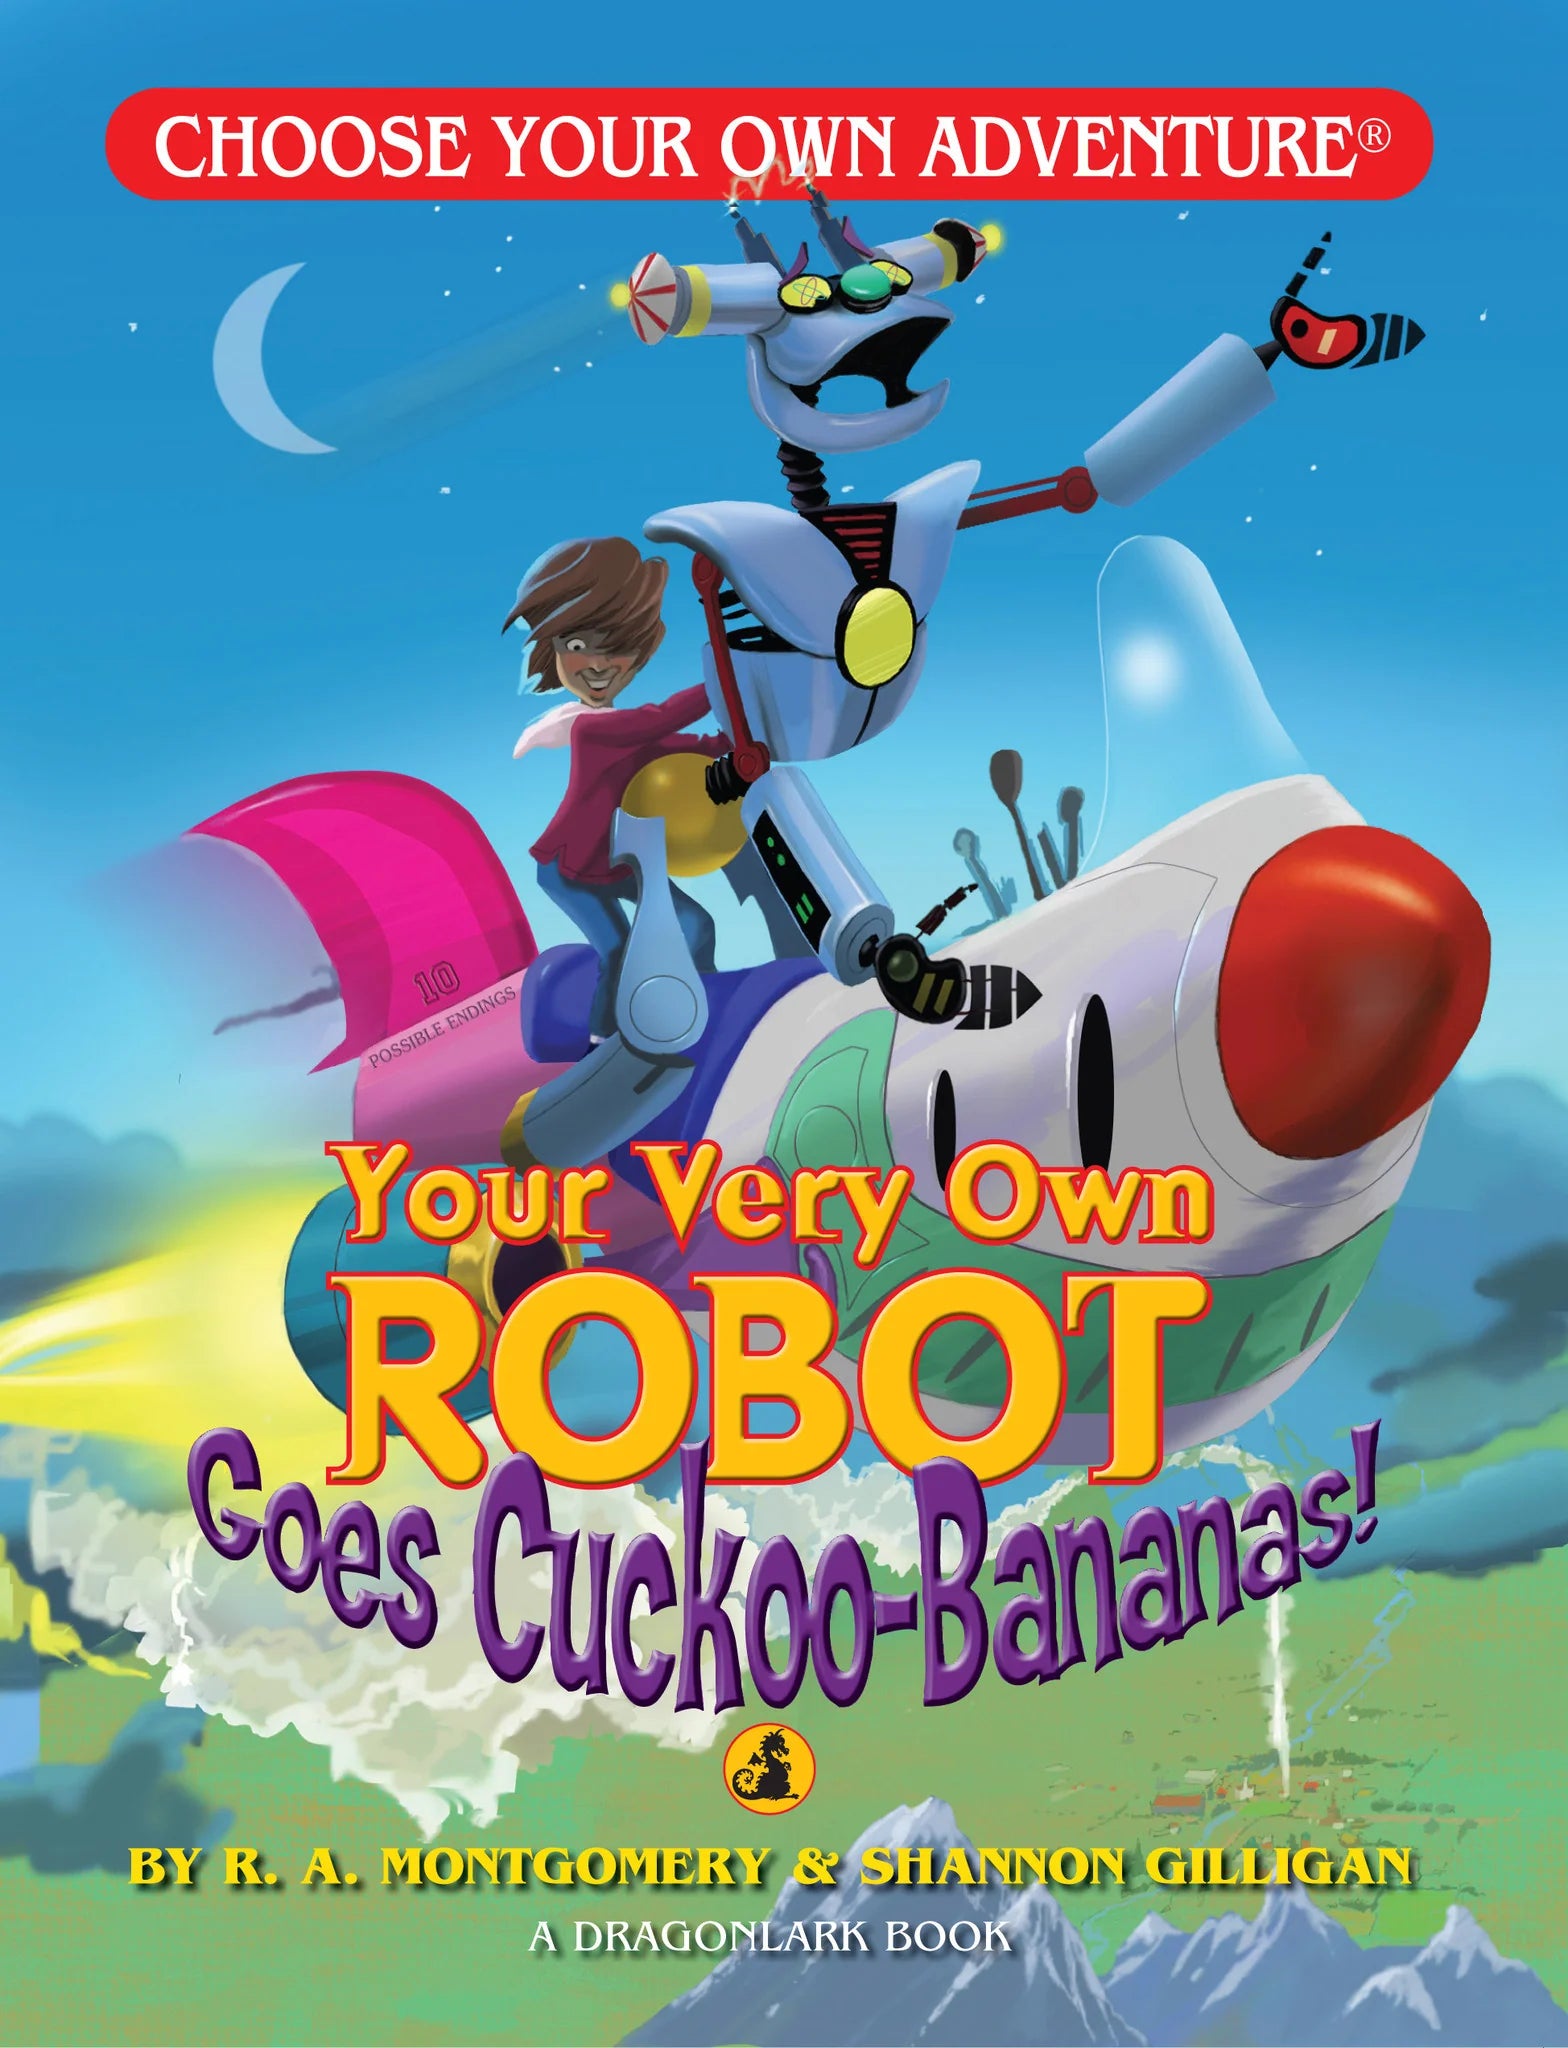 Choose Your Own Adventure: Robot Goes Cuckoo-Bananas